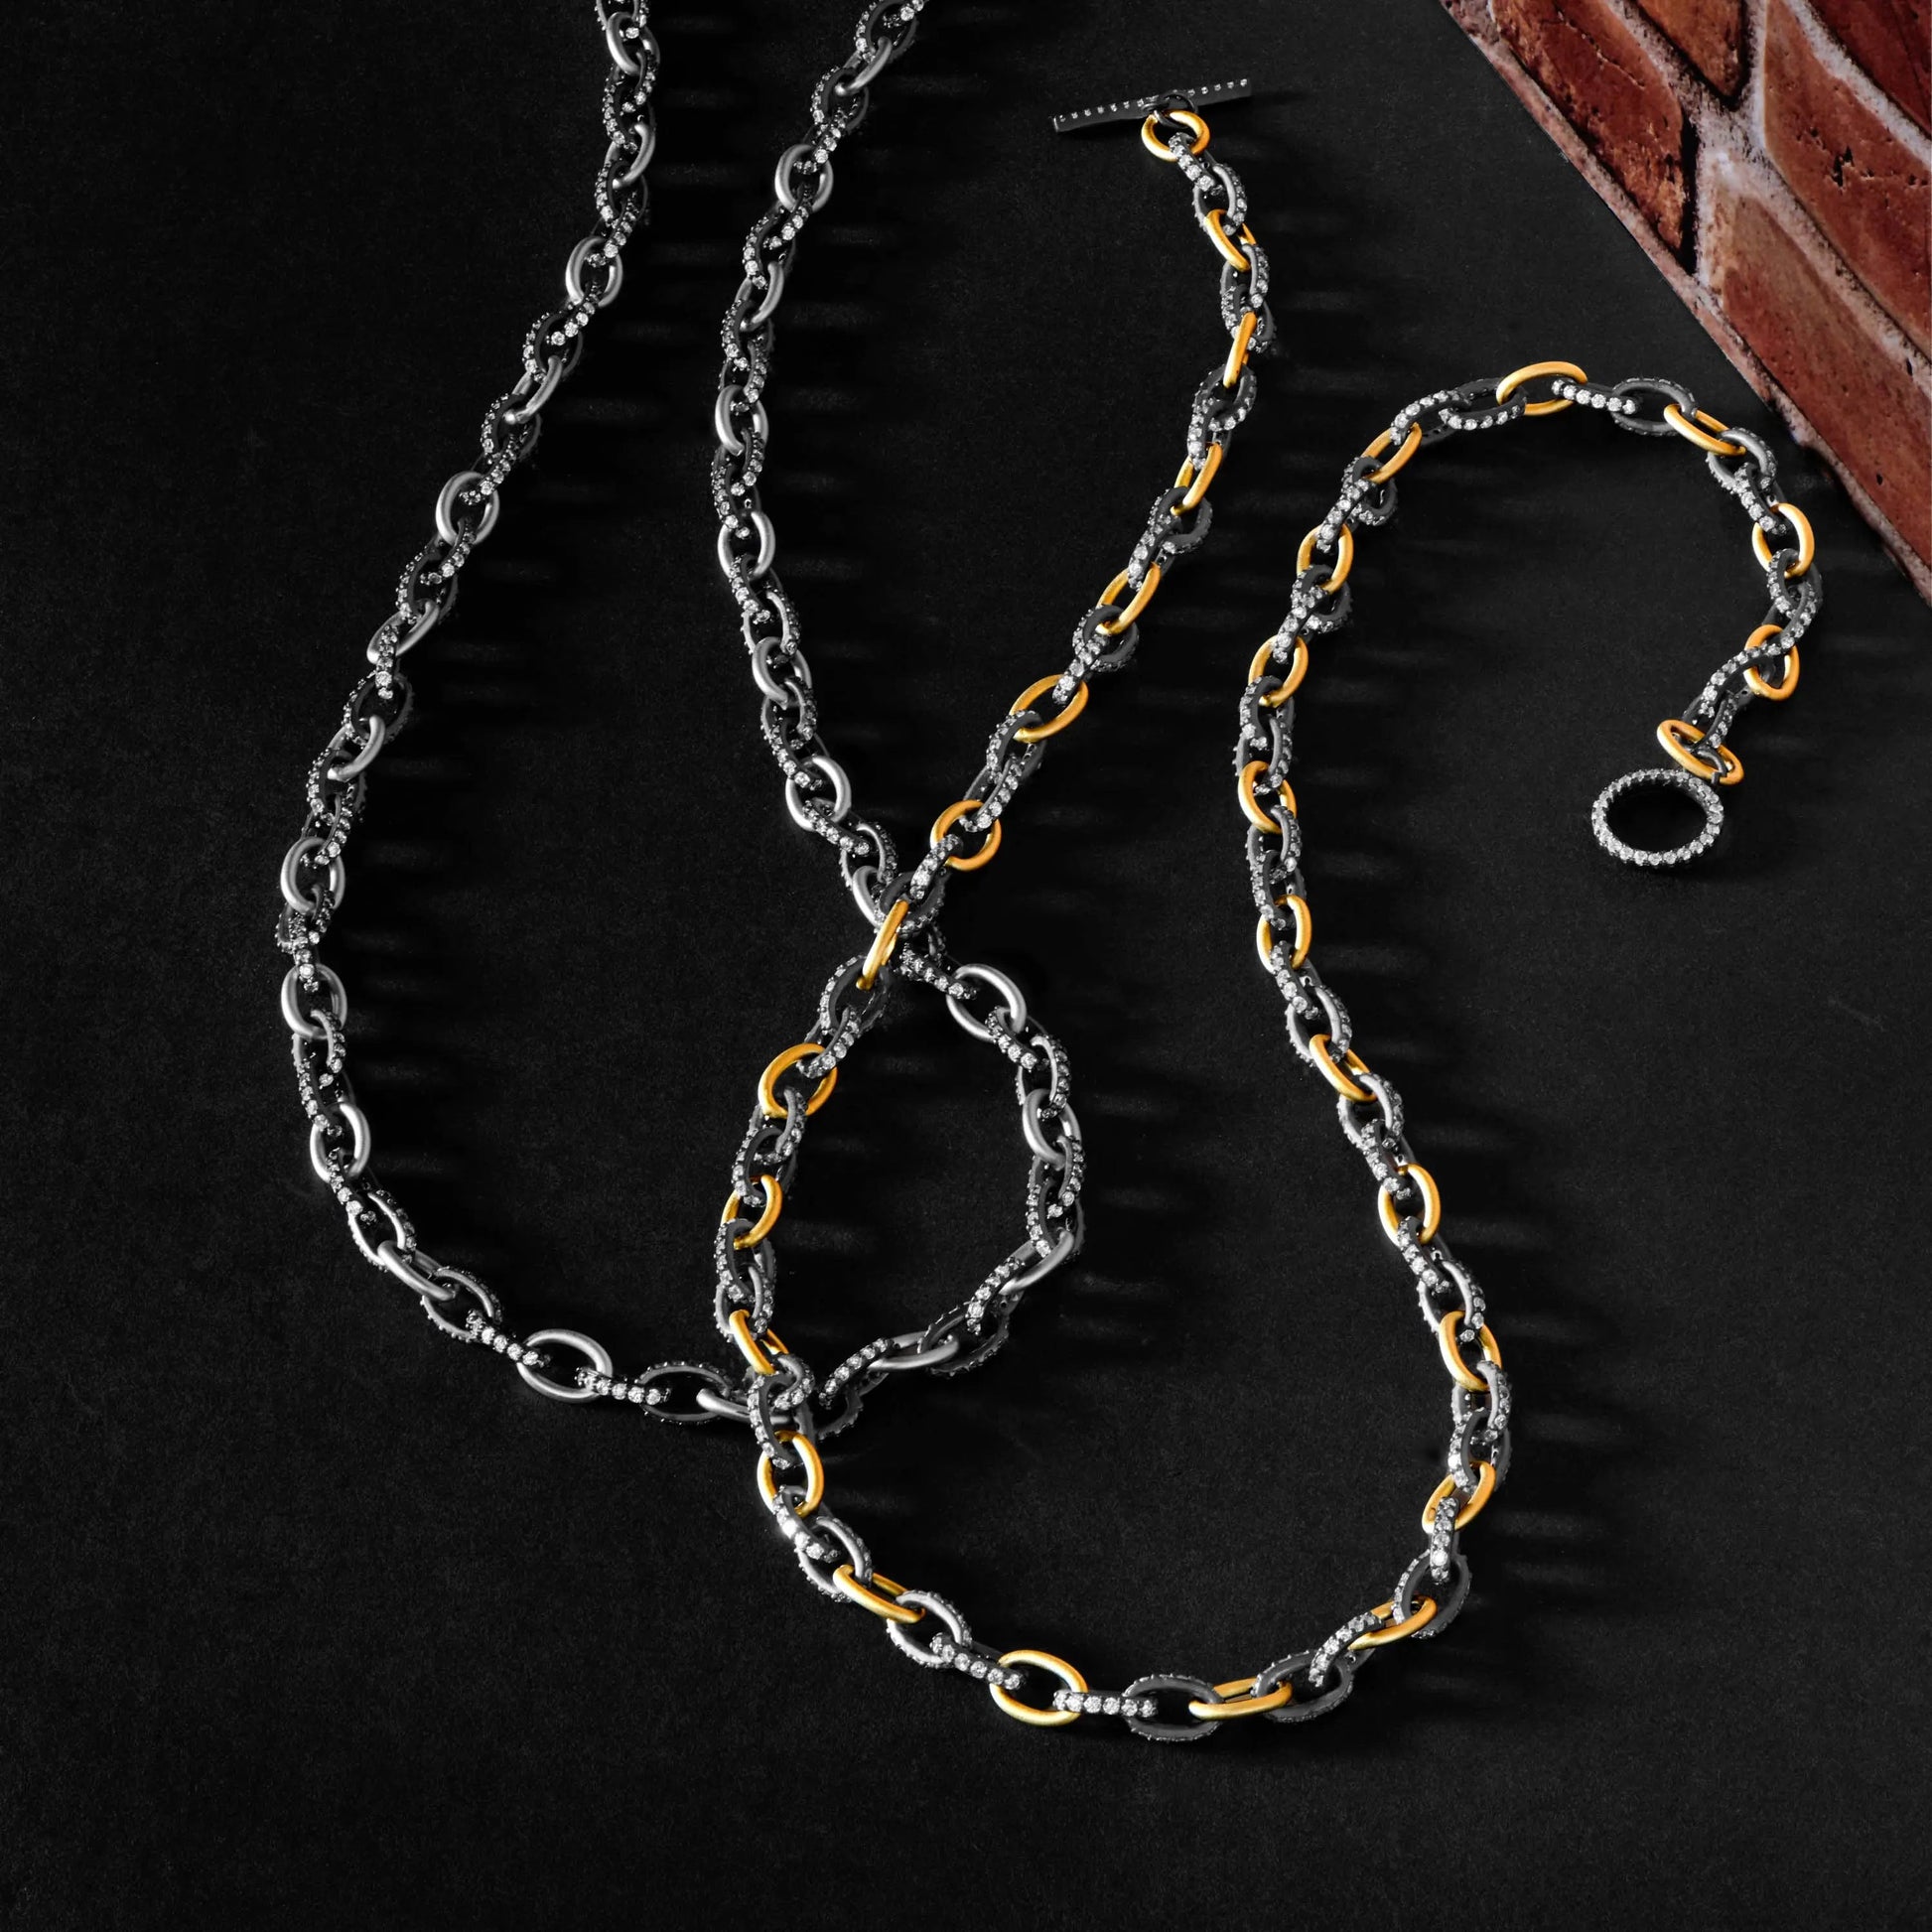  Alternating Chain Link Necklace Signature NECKLACE